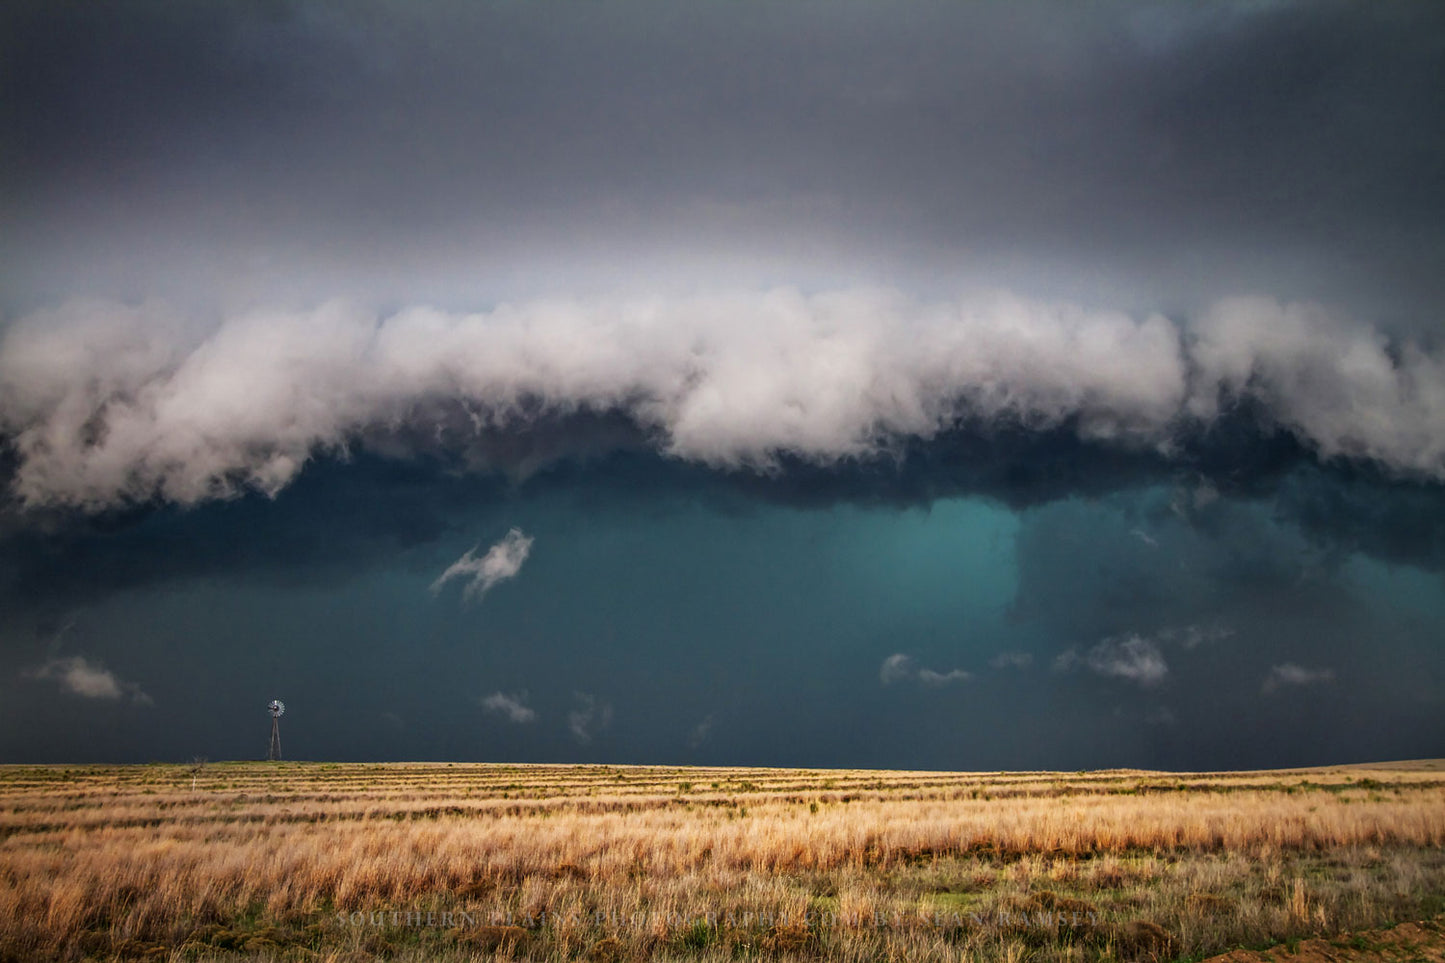 Storm photography print of a powerful thunderstorm engulfing a windmill on the plains of the Texas panhandle by Sean Ramsey of Southern Plains Photography.